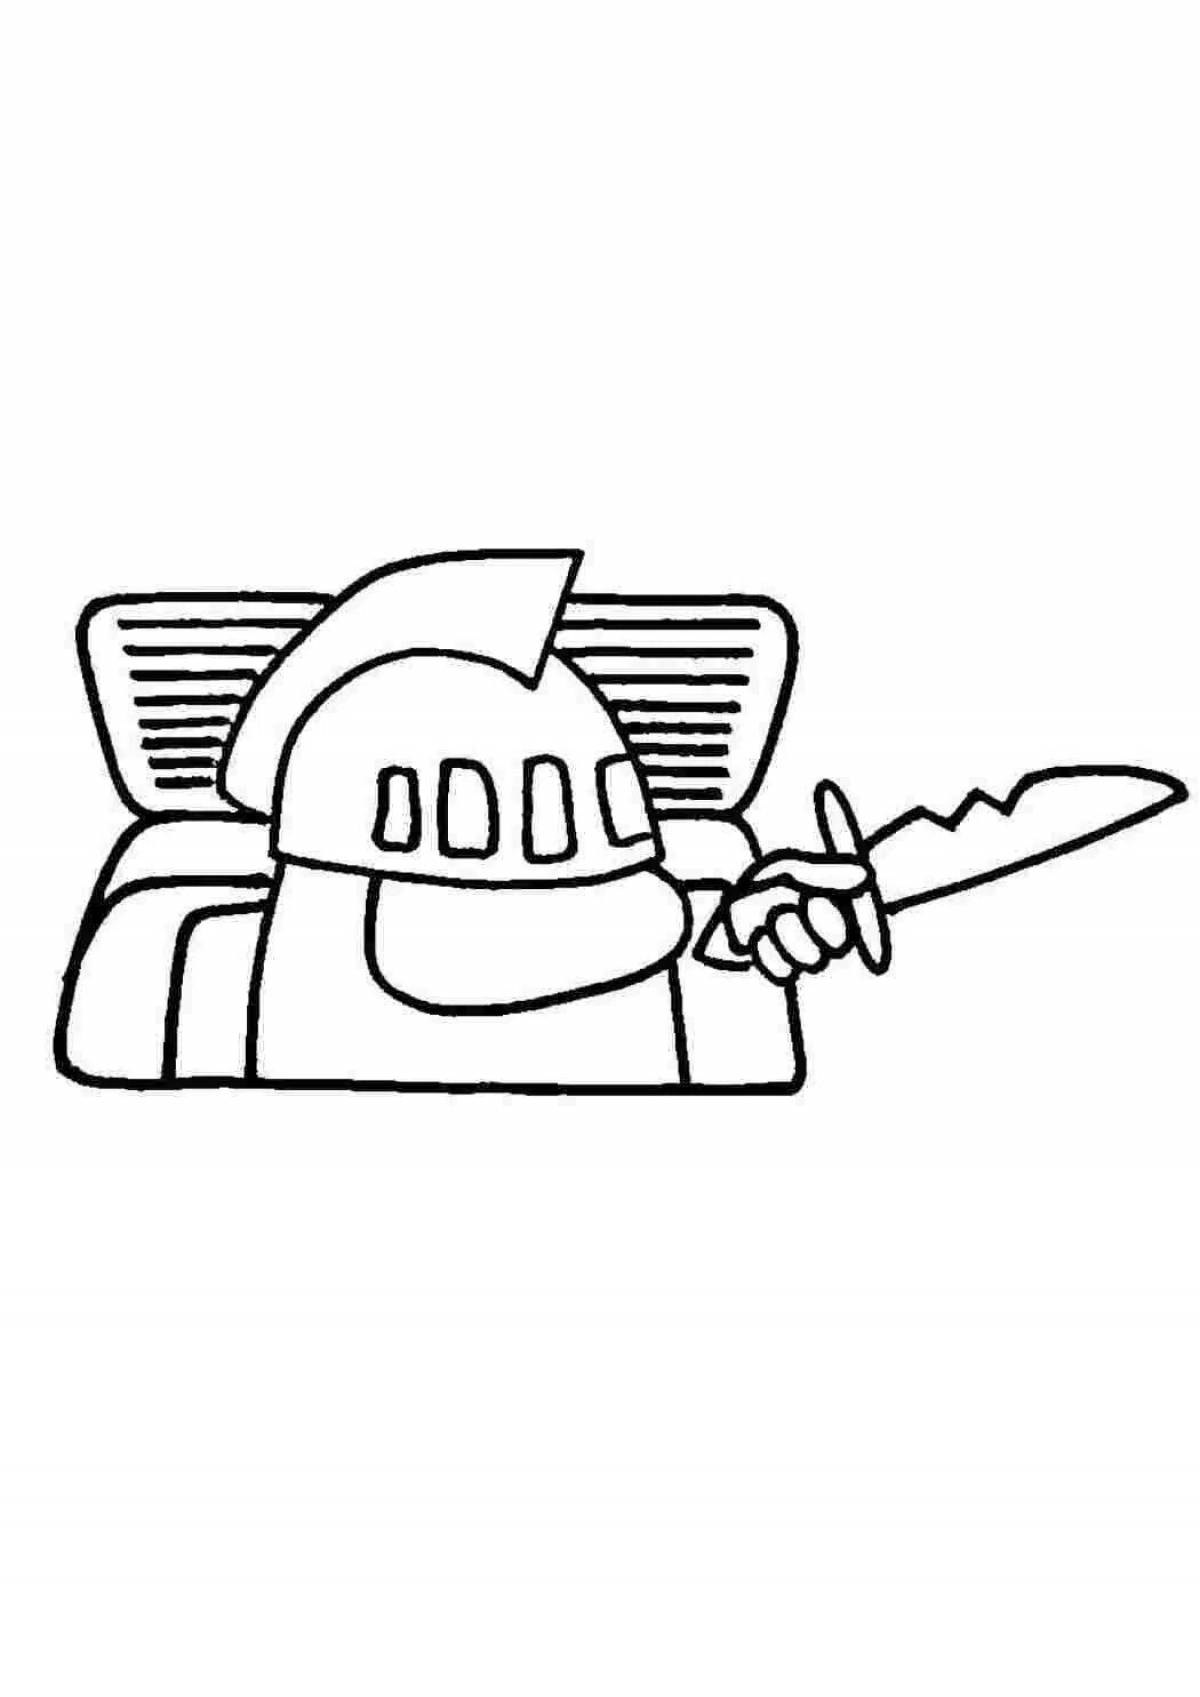 Relaxing traitor coloring page